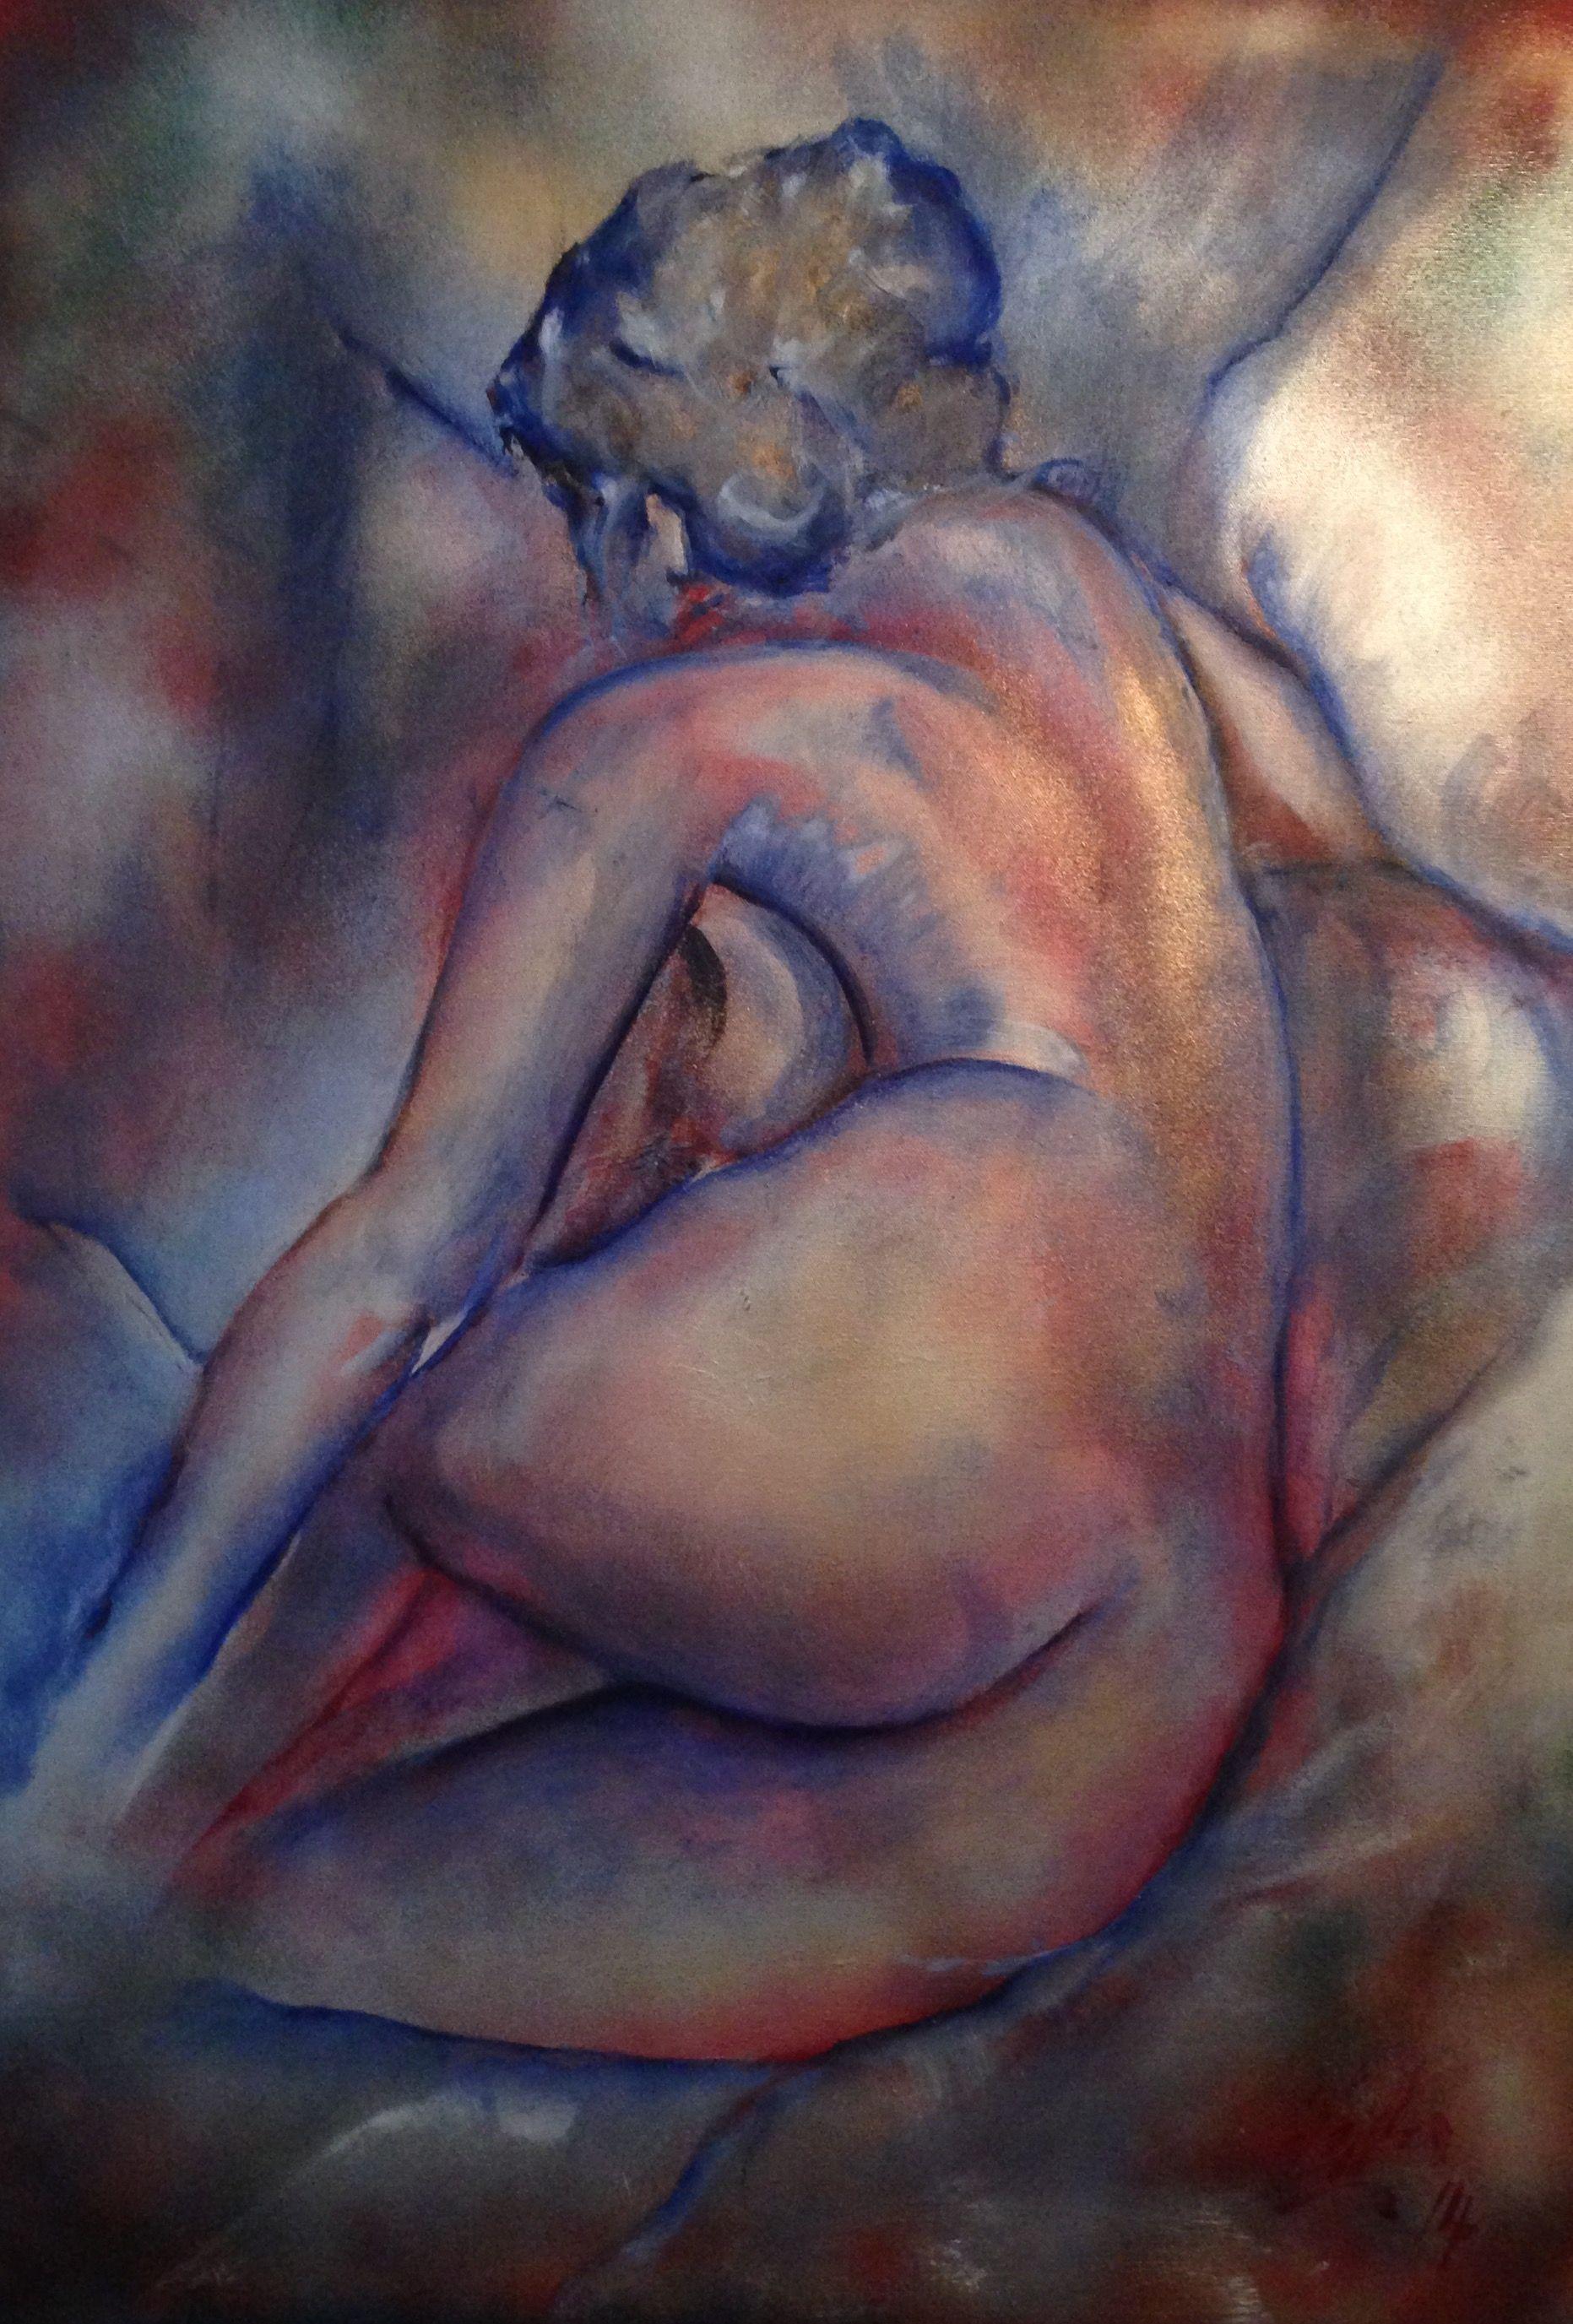 Original oil painting by James Shipton on block canvas.  My works are heavily influenced by the art work of Degas and Gustav Klimt.  My desire is to capture the beauty of the female human form, whilst portraying human isolation (loneliness). I